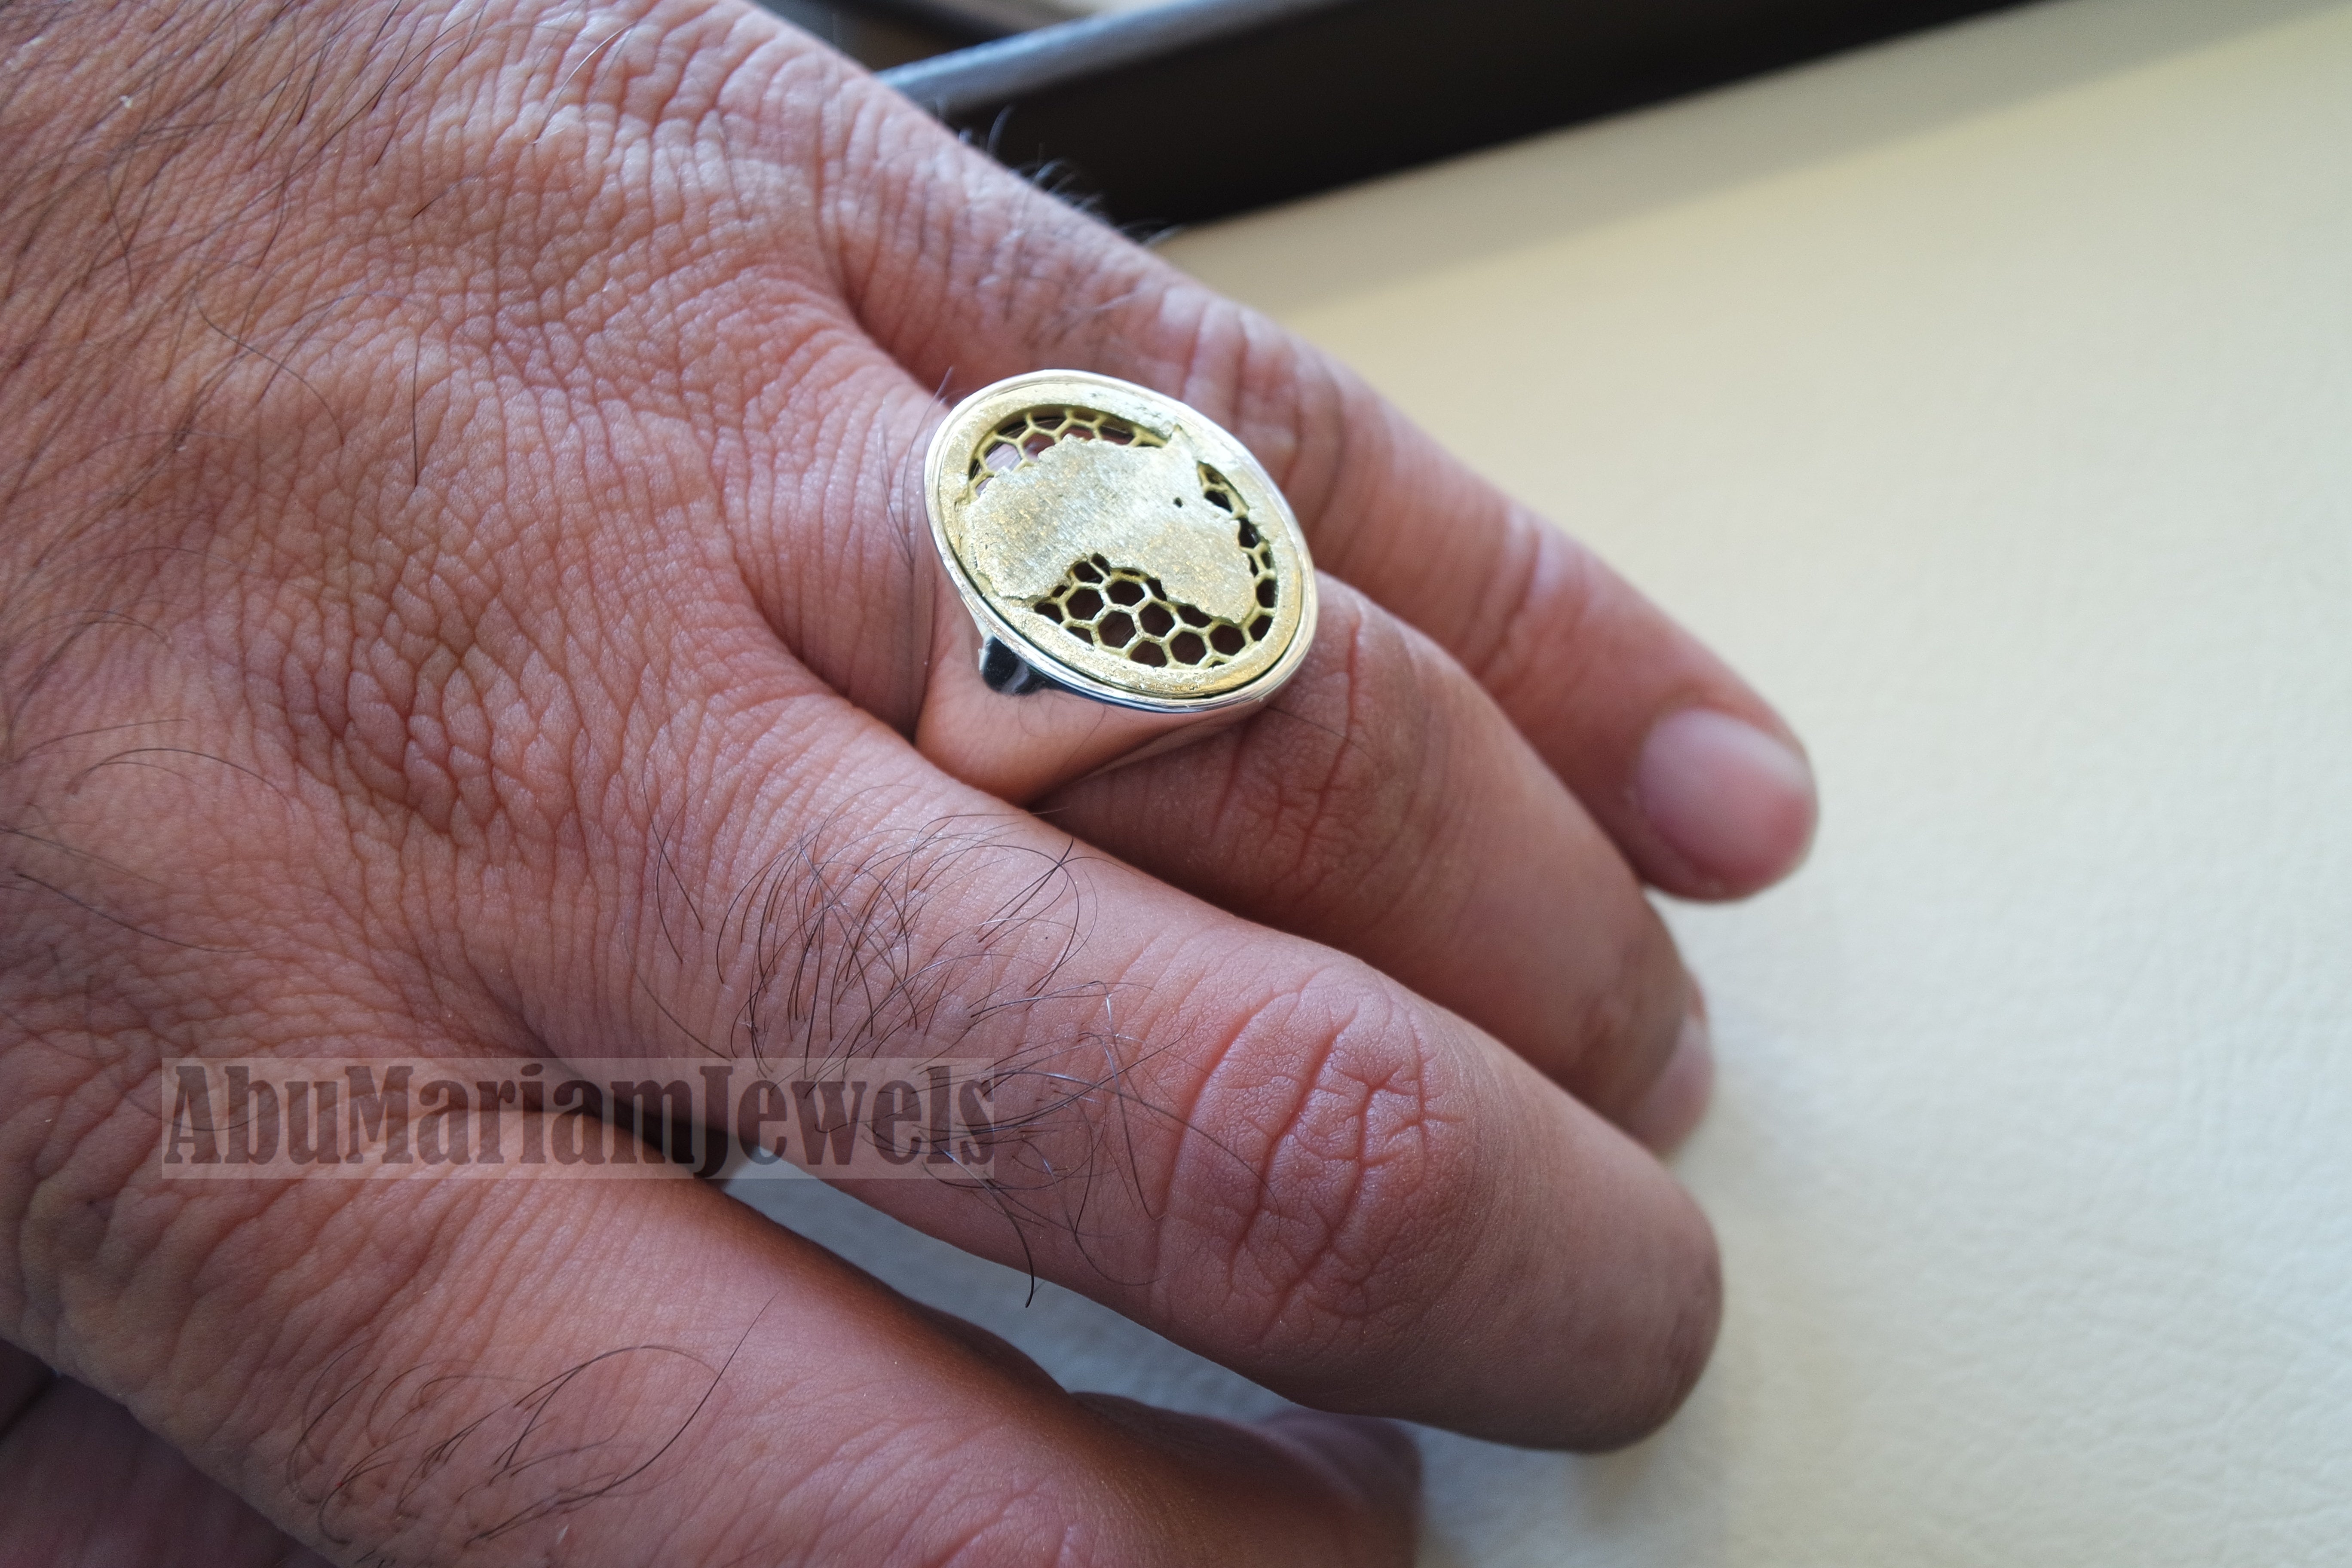 Africa map man ring sterling silver 925 and bronze Arabic oval signet style fast shipping all sizes خاتم أفريقيا